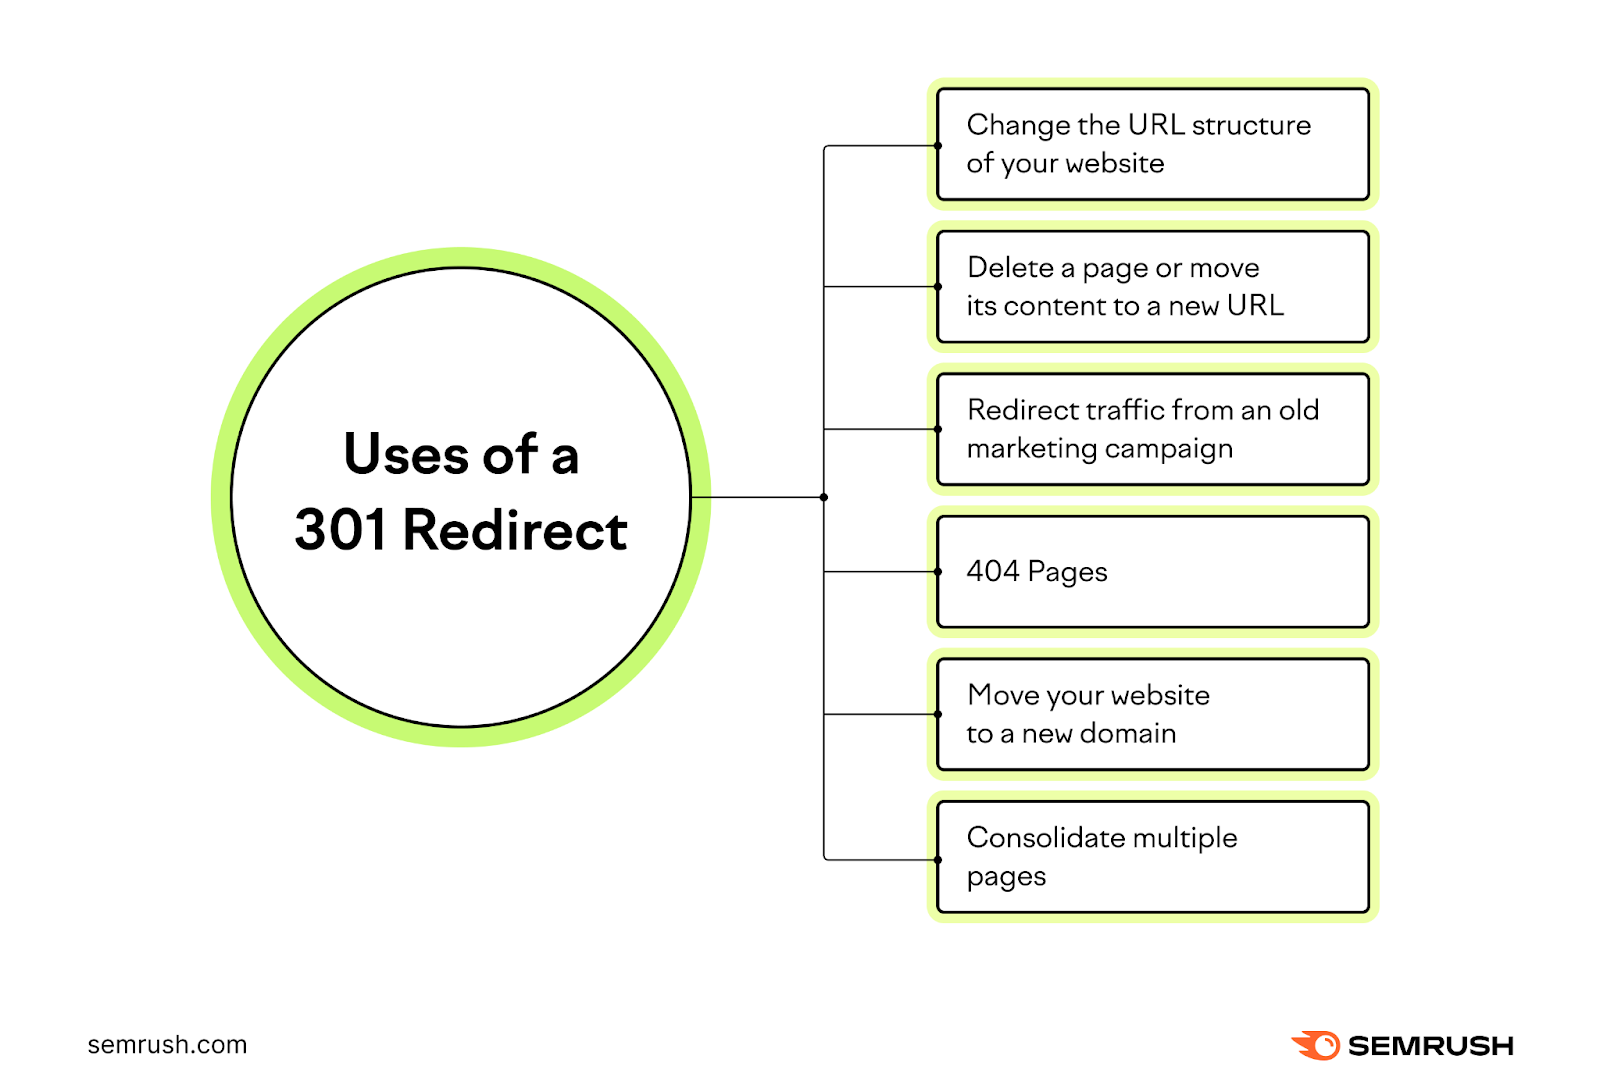 A list of uses of a 301 redirect